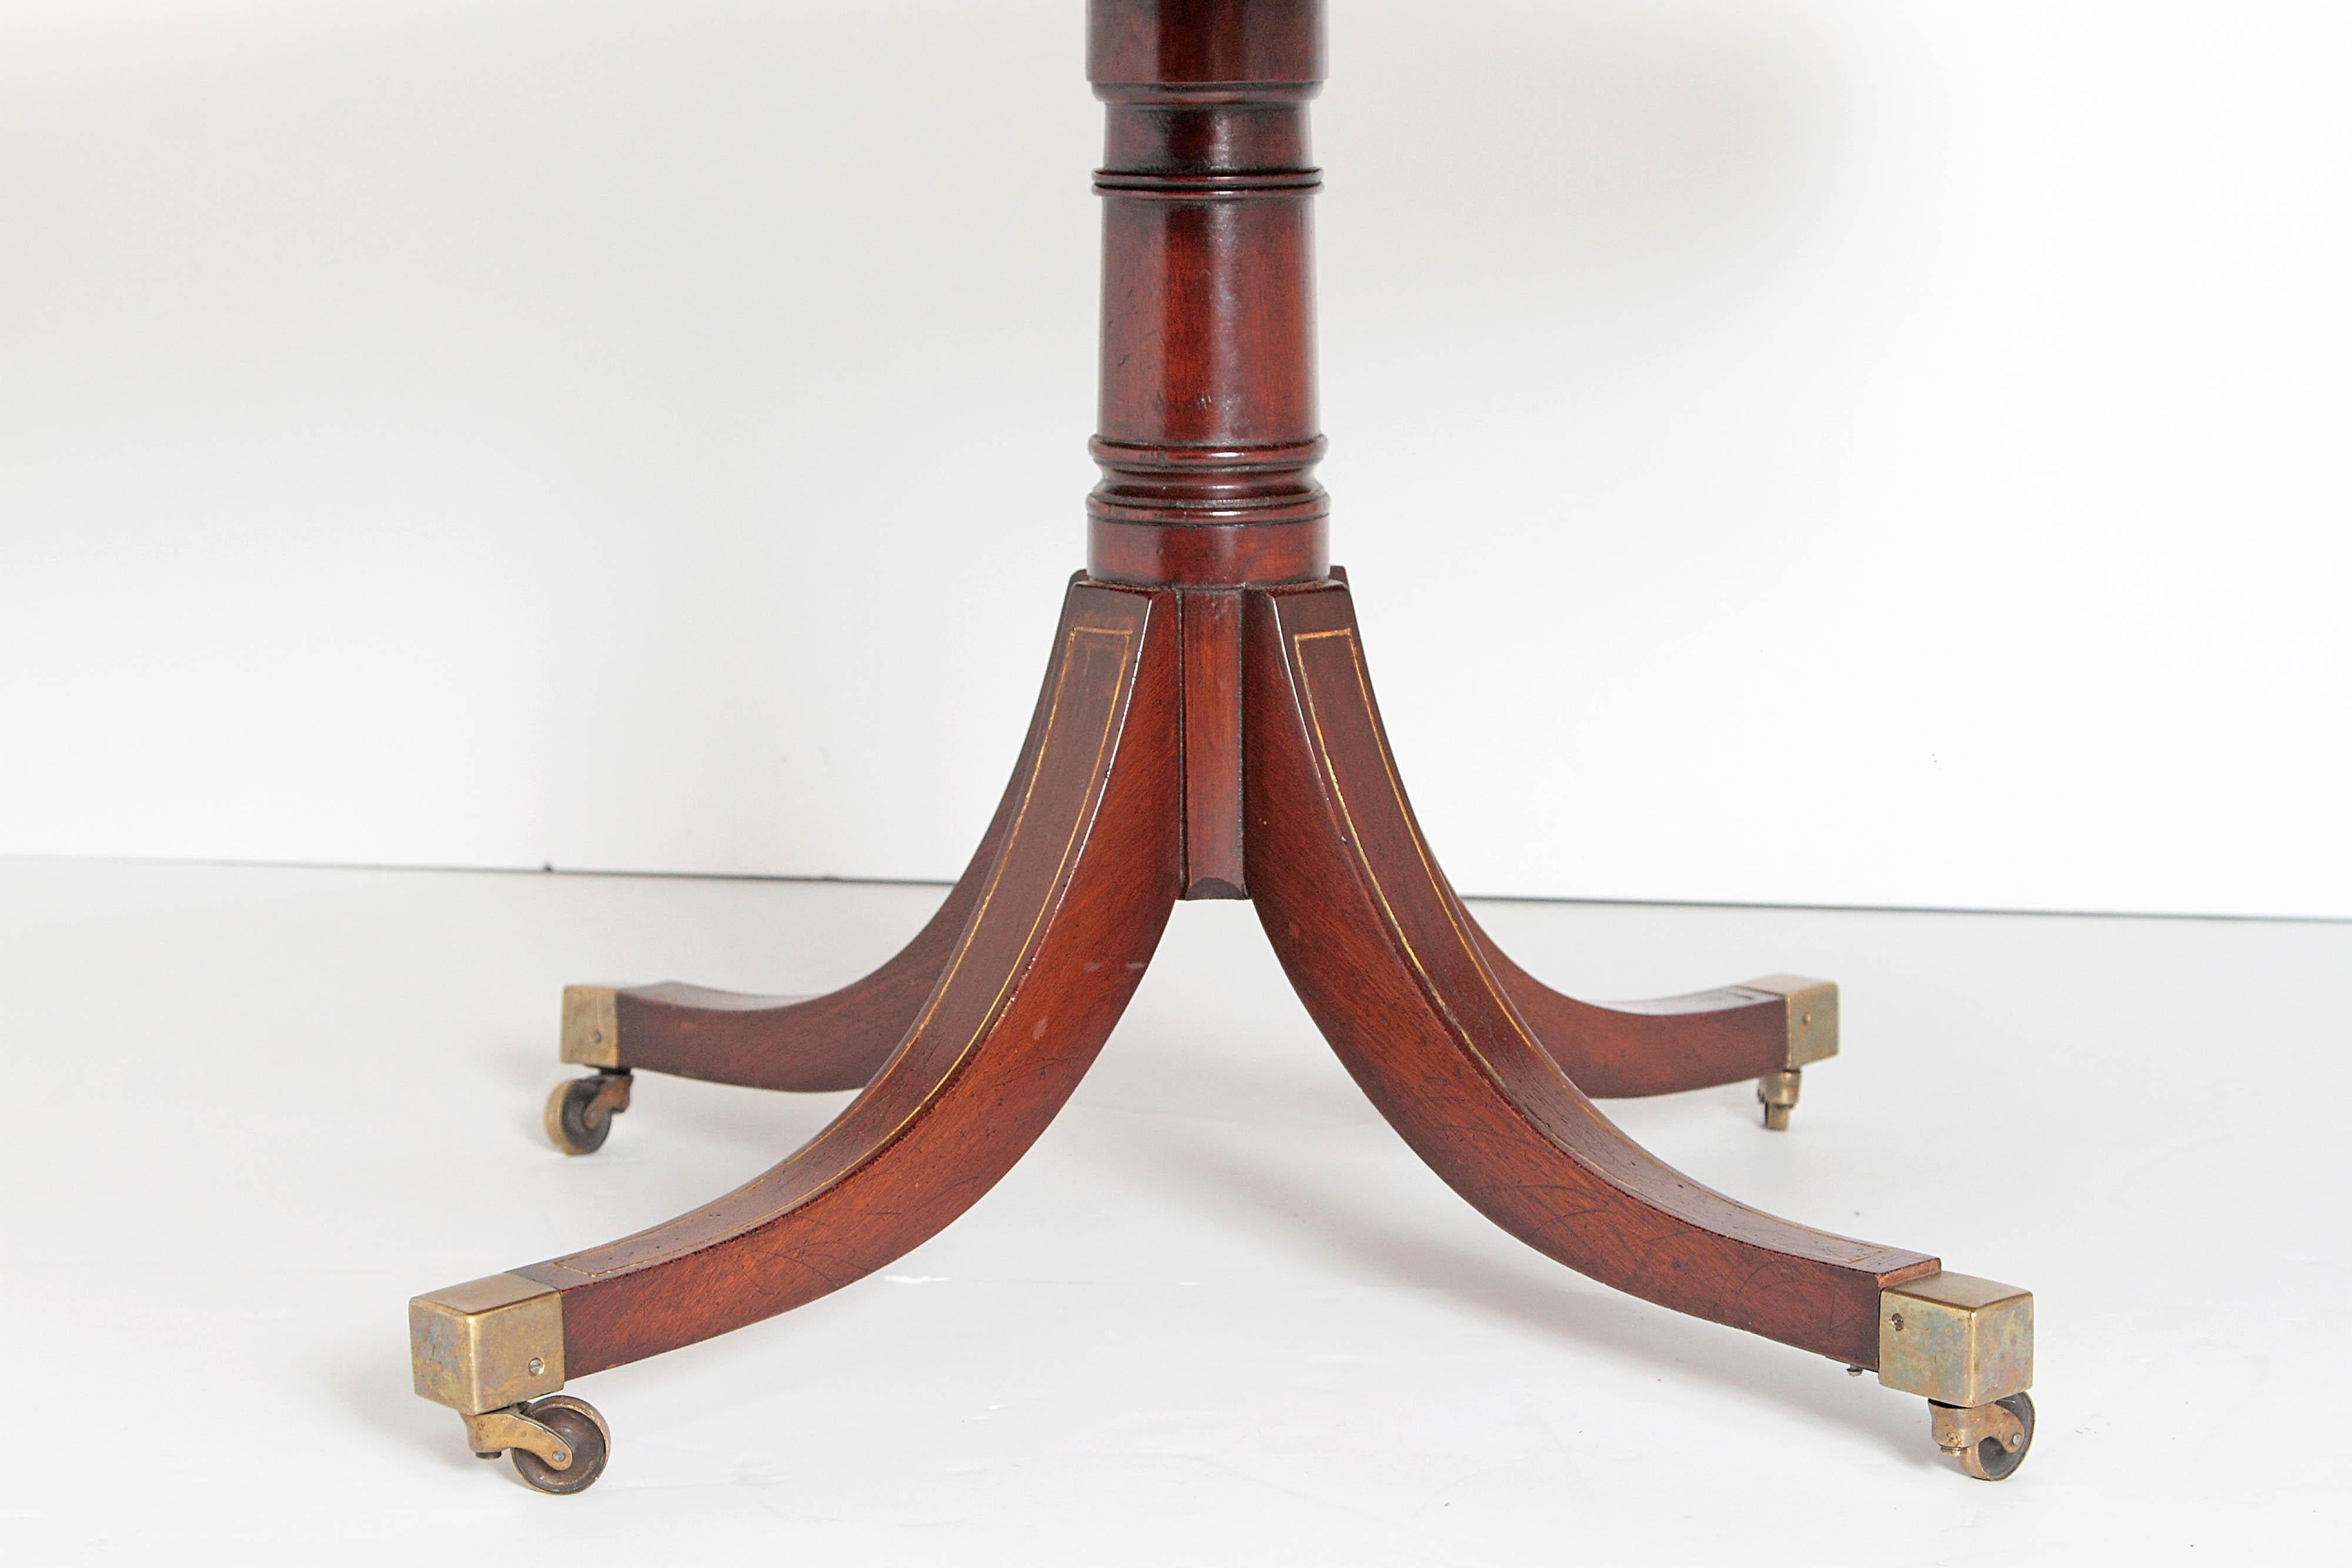 Leather English Regency Drum Table with Brass Campaign-Style Hardware / Fittings